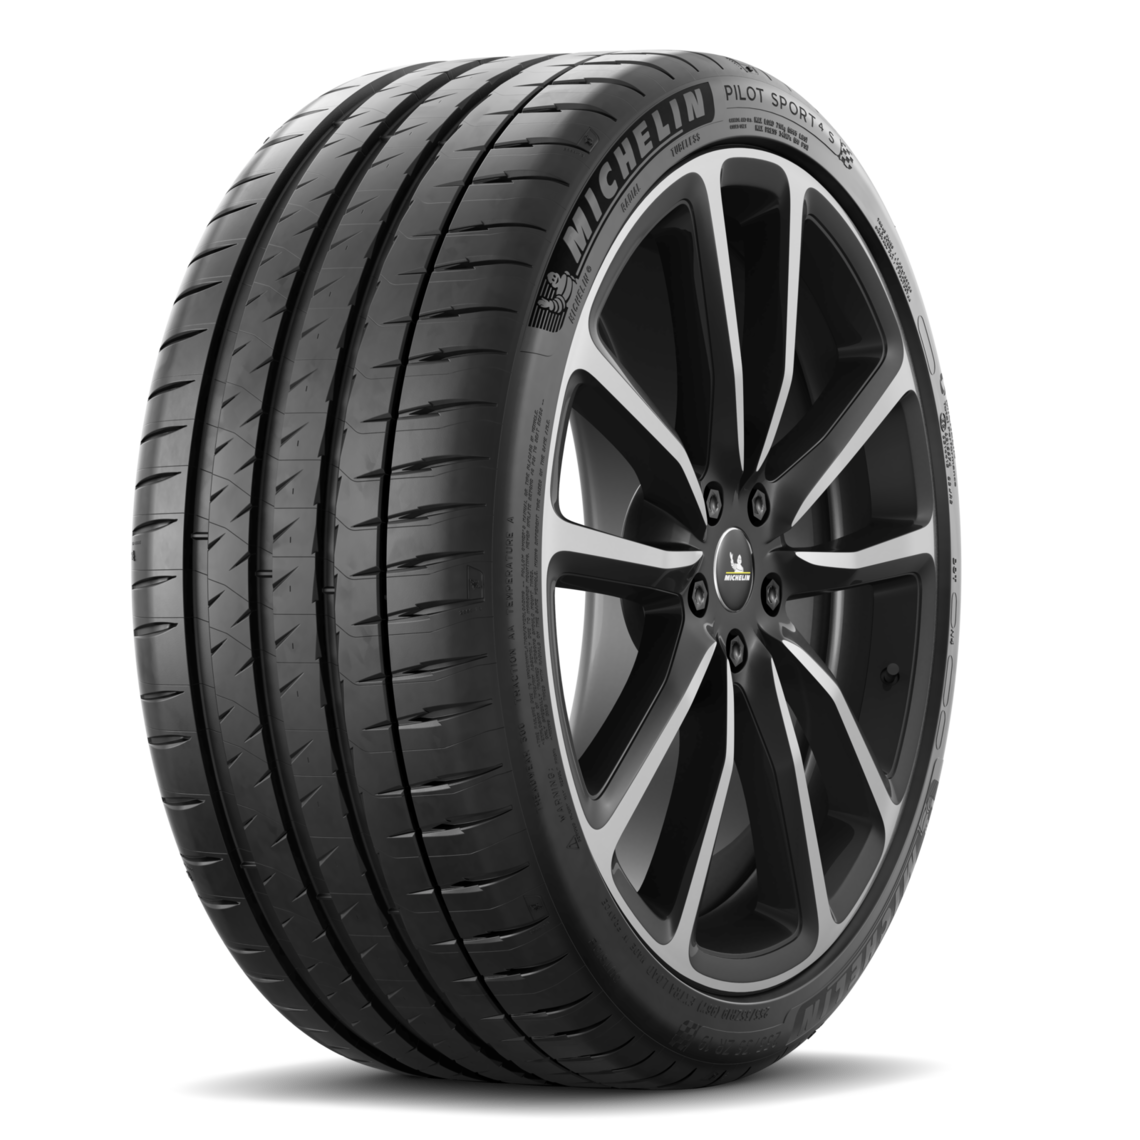 Michelin Pilot Sport 4 S * - Tire Reviews and Tests